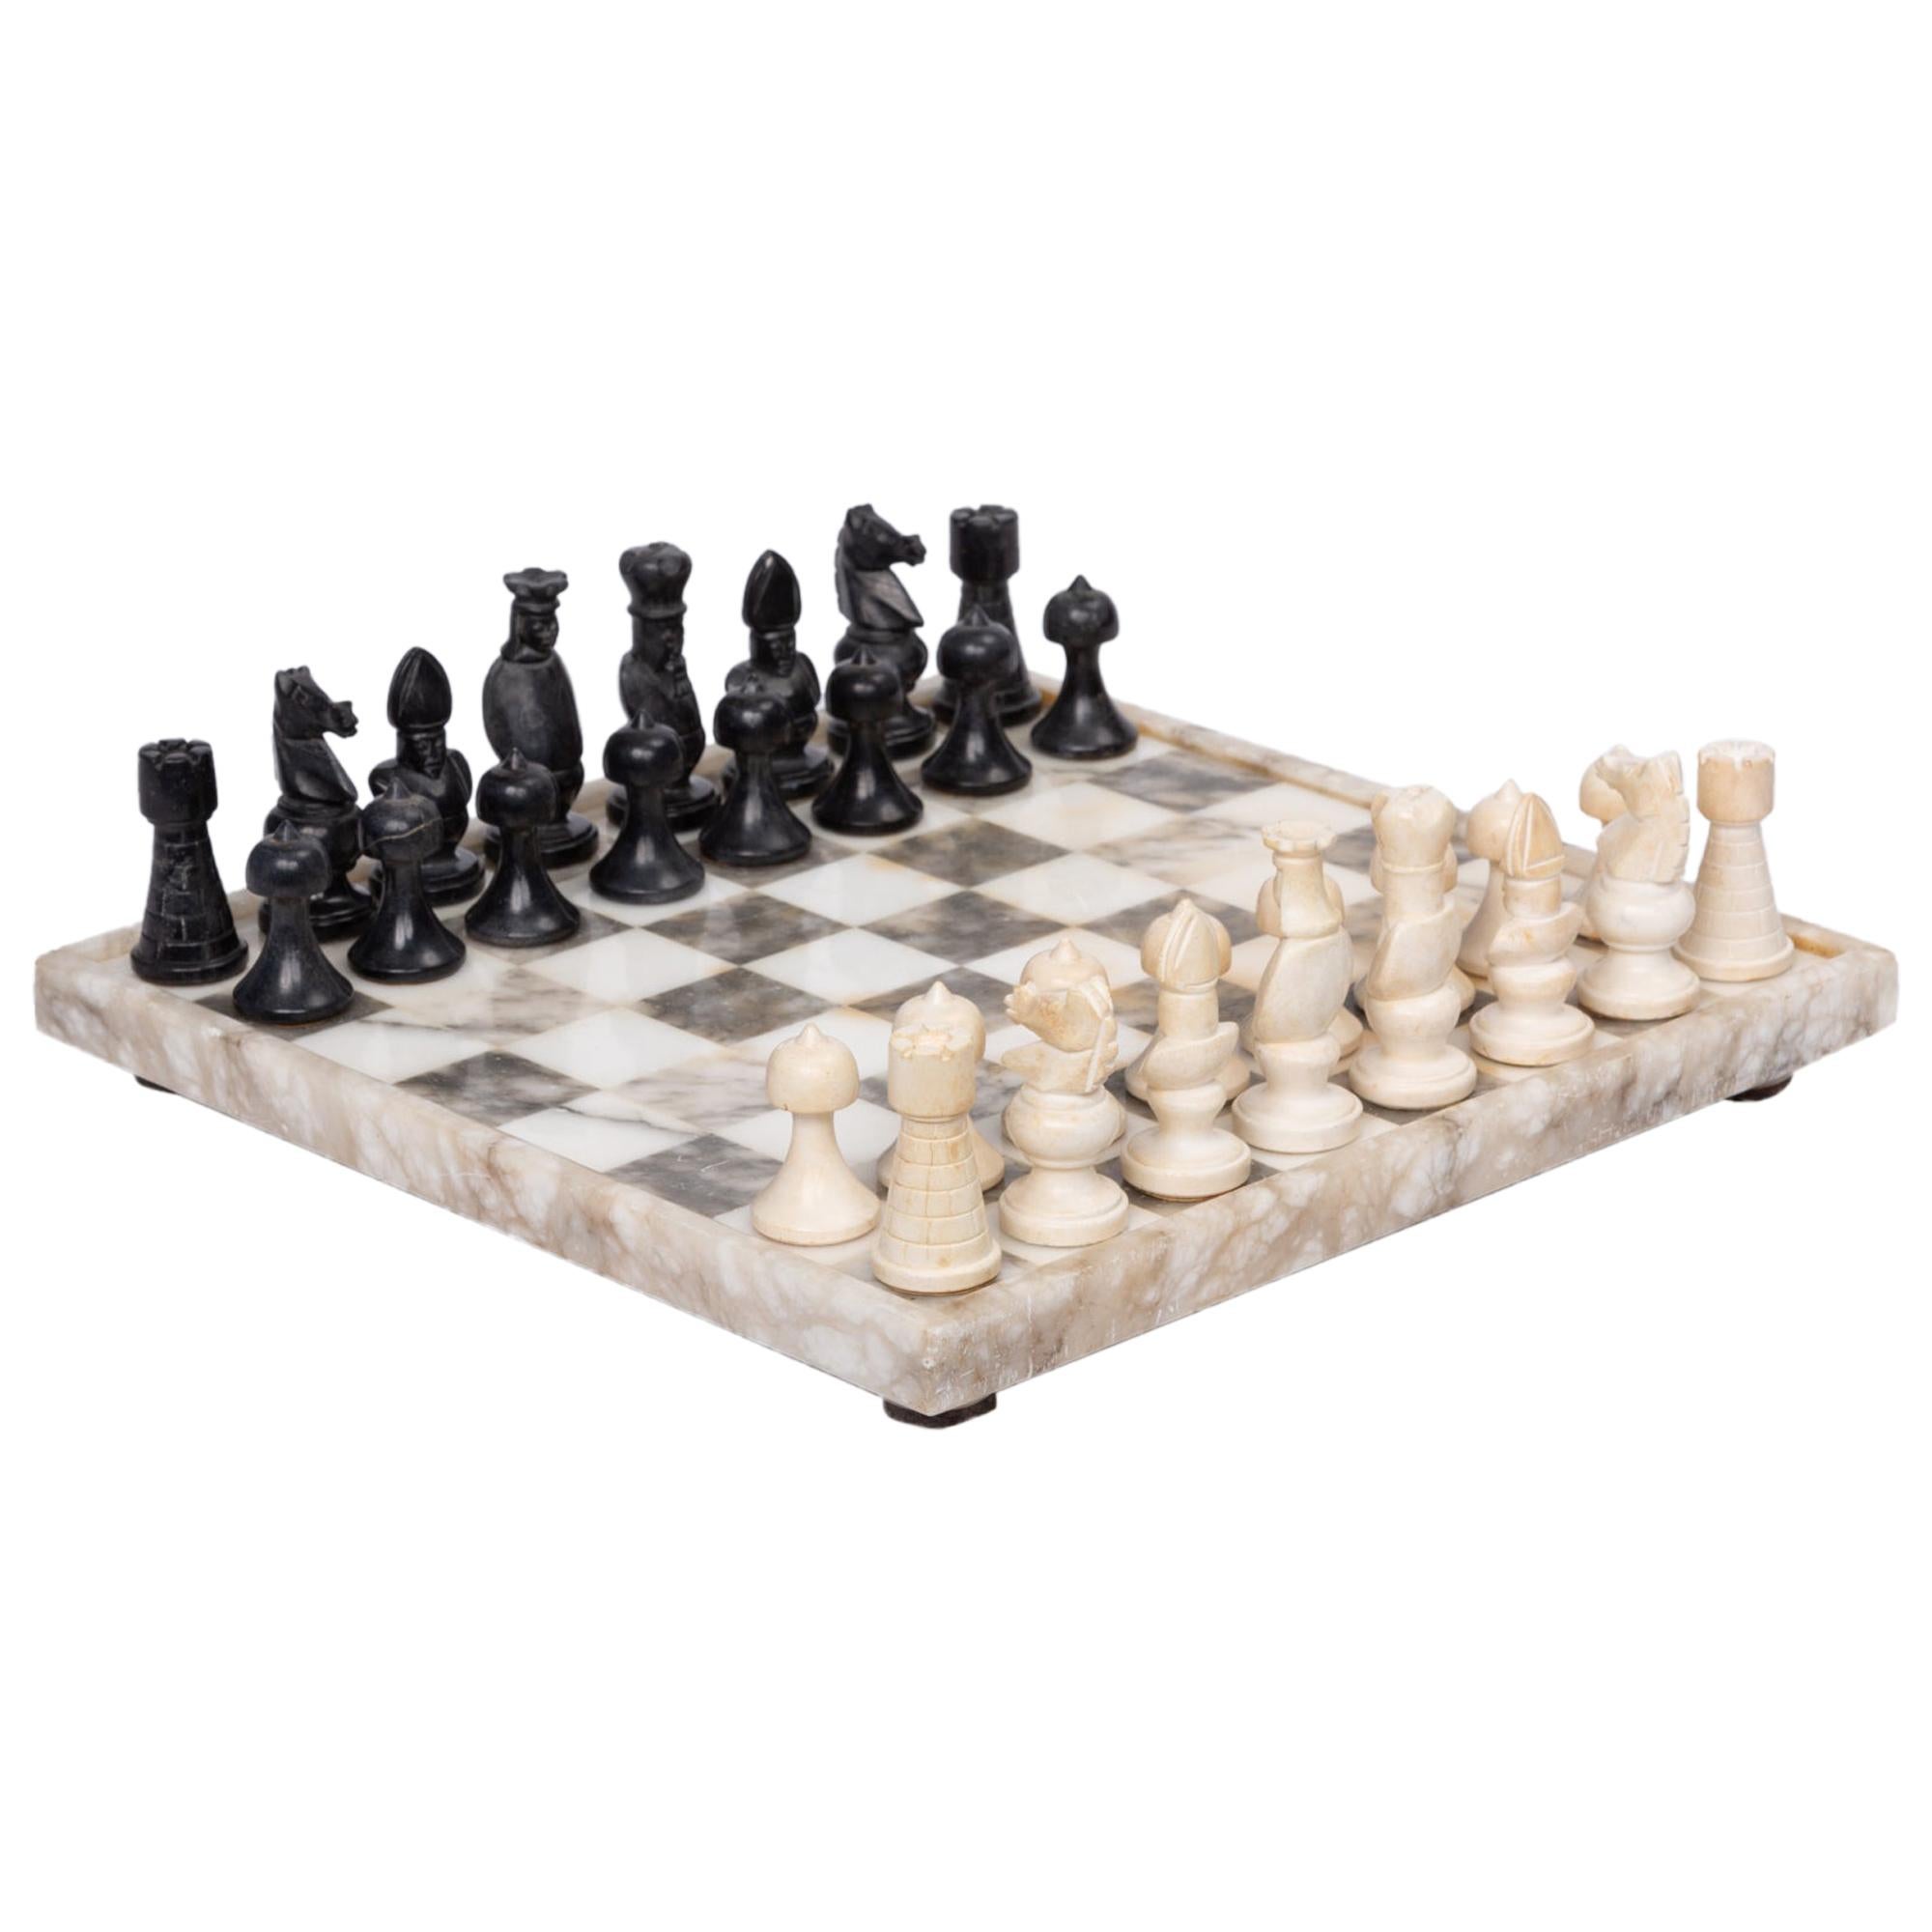 Chess Set Decorative Zamak Chess Antique Stones With Marble Chess Board 